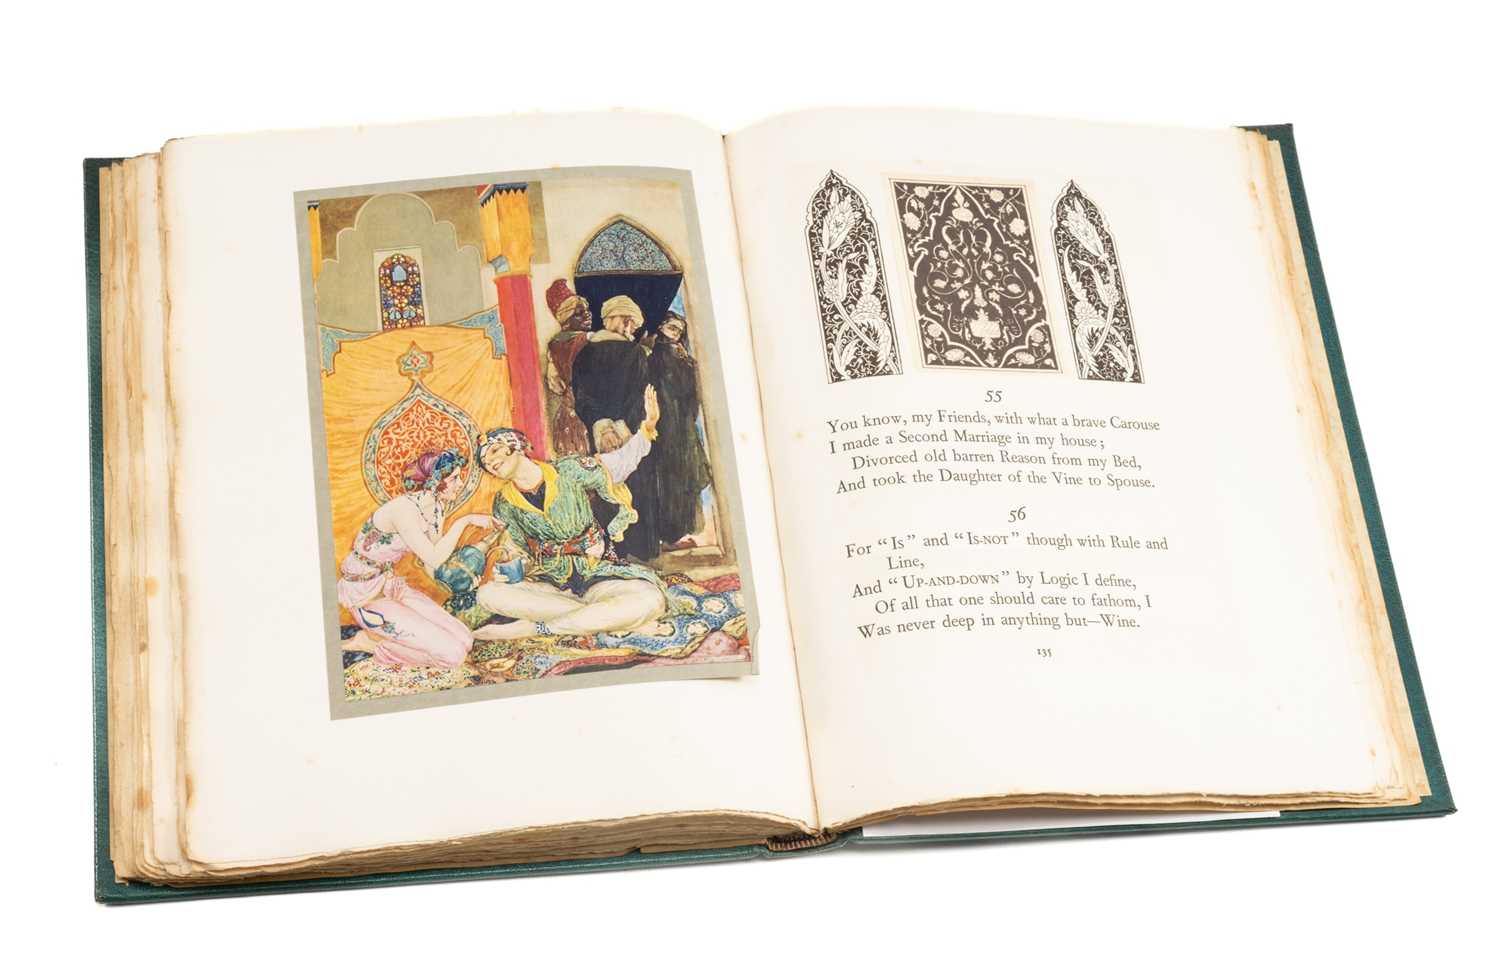 POGANY (WILLY) illustrator. Rubáiyát of Omar Khayyám, The First and Fourth Renderings in English